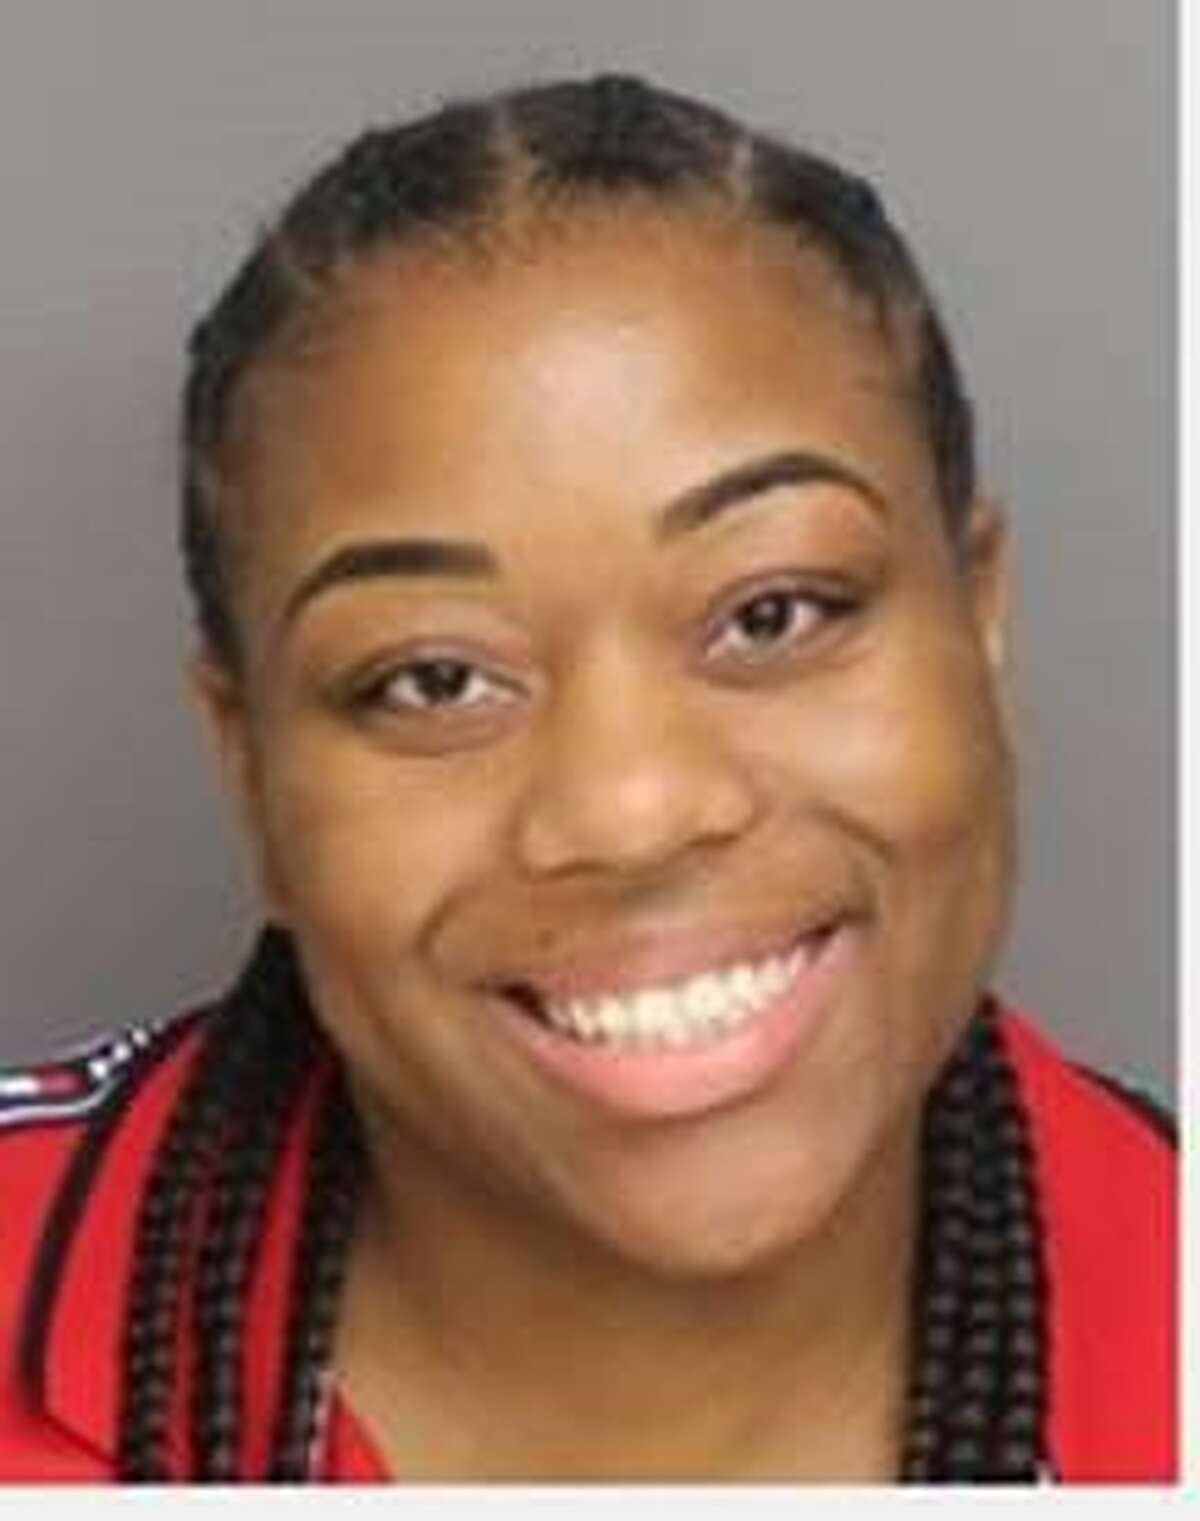 Tiffany Covington, 28, was charged with two counts of risk of injury to a child, and one count each of interfering with police and assault on a public safety officer.